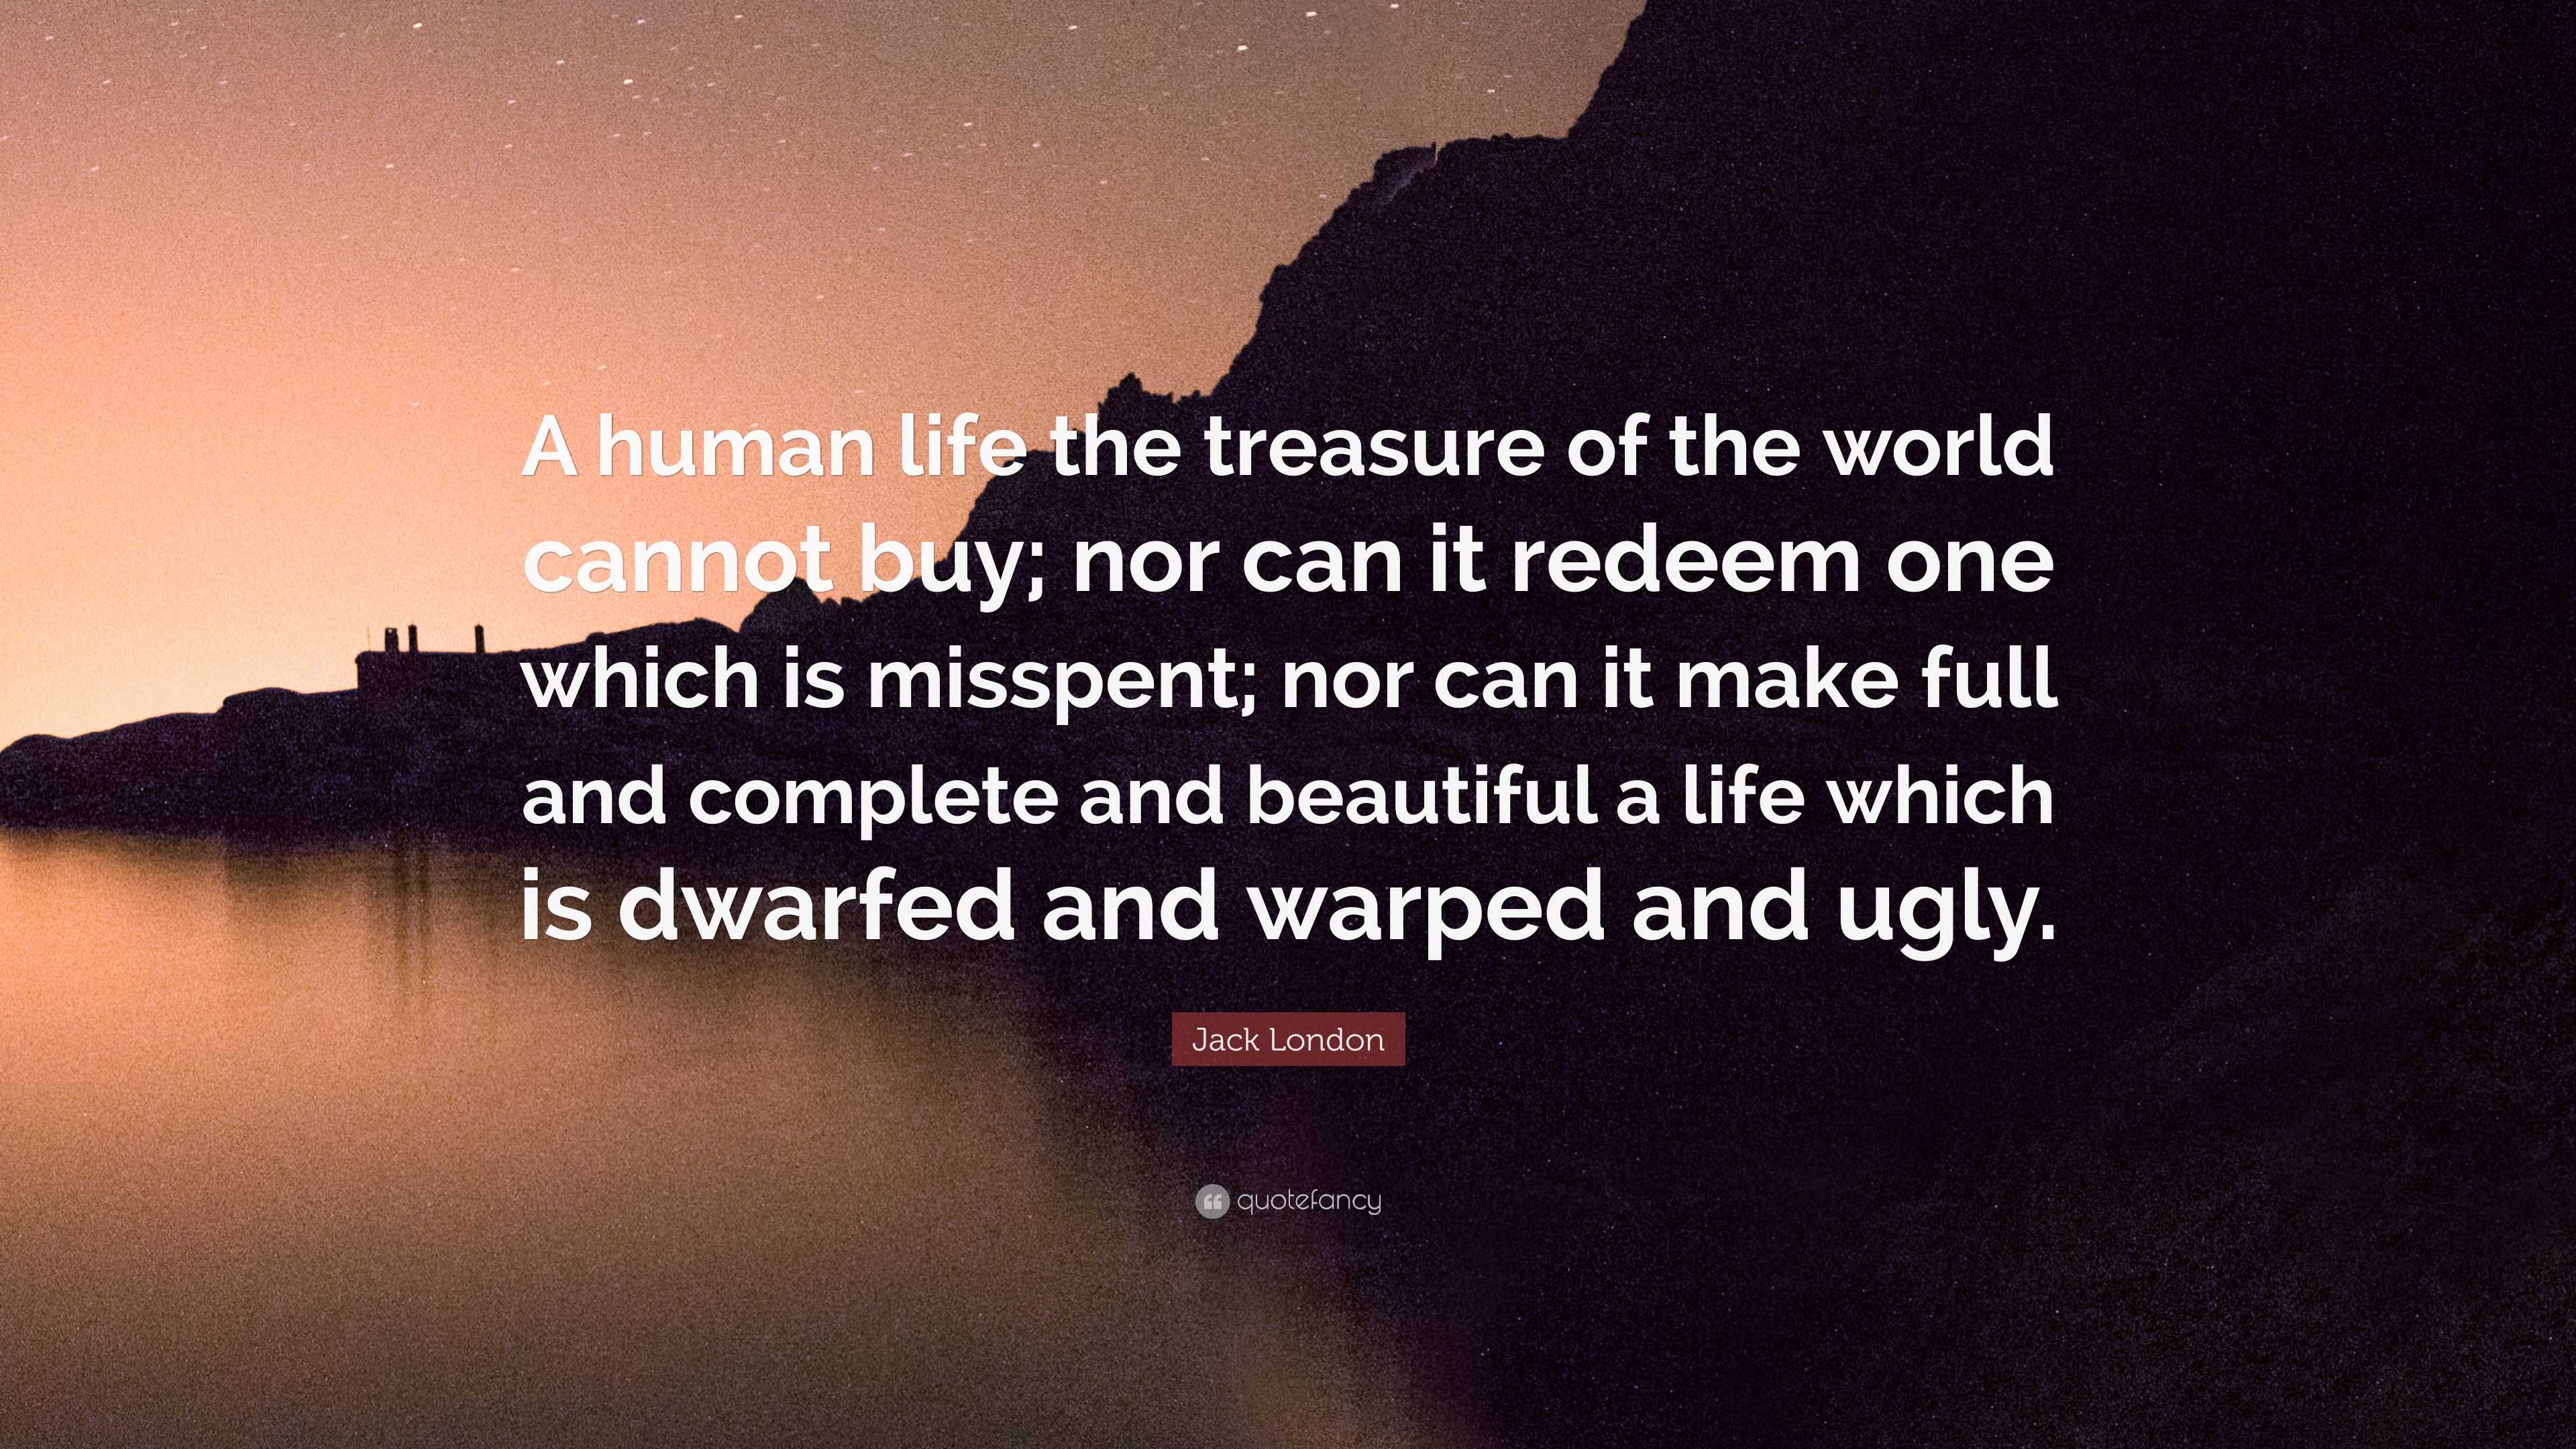 Jack London Quote “A human life the treasure of the world cannot